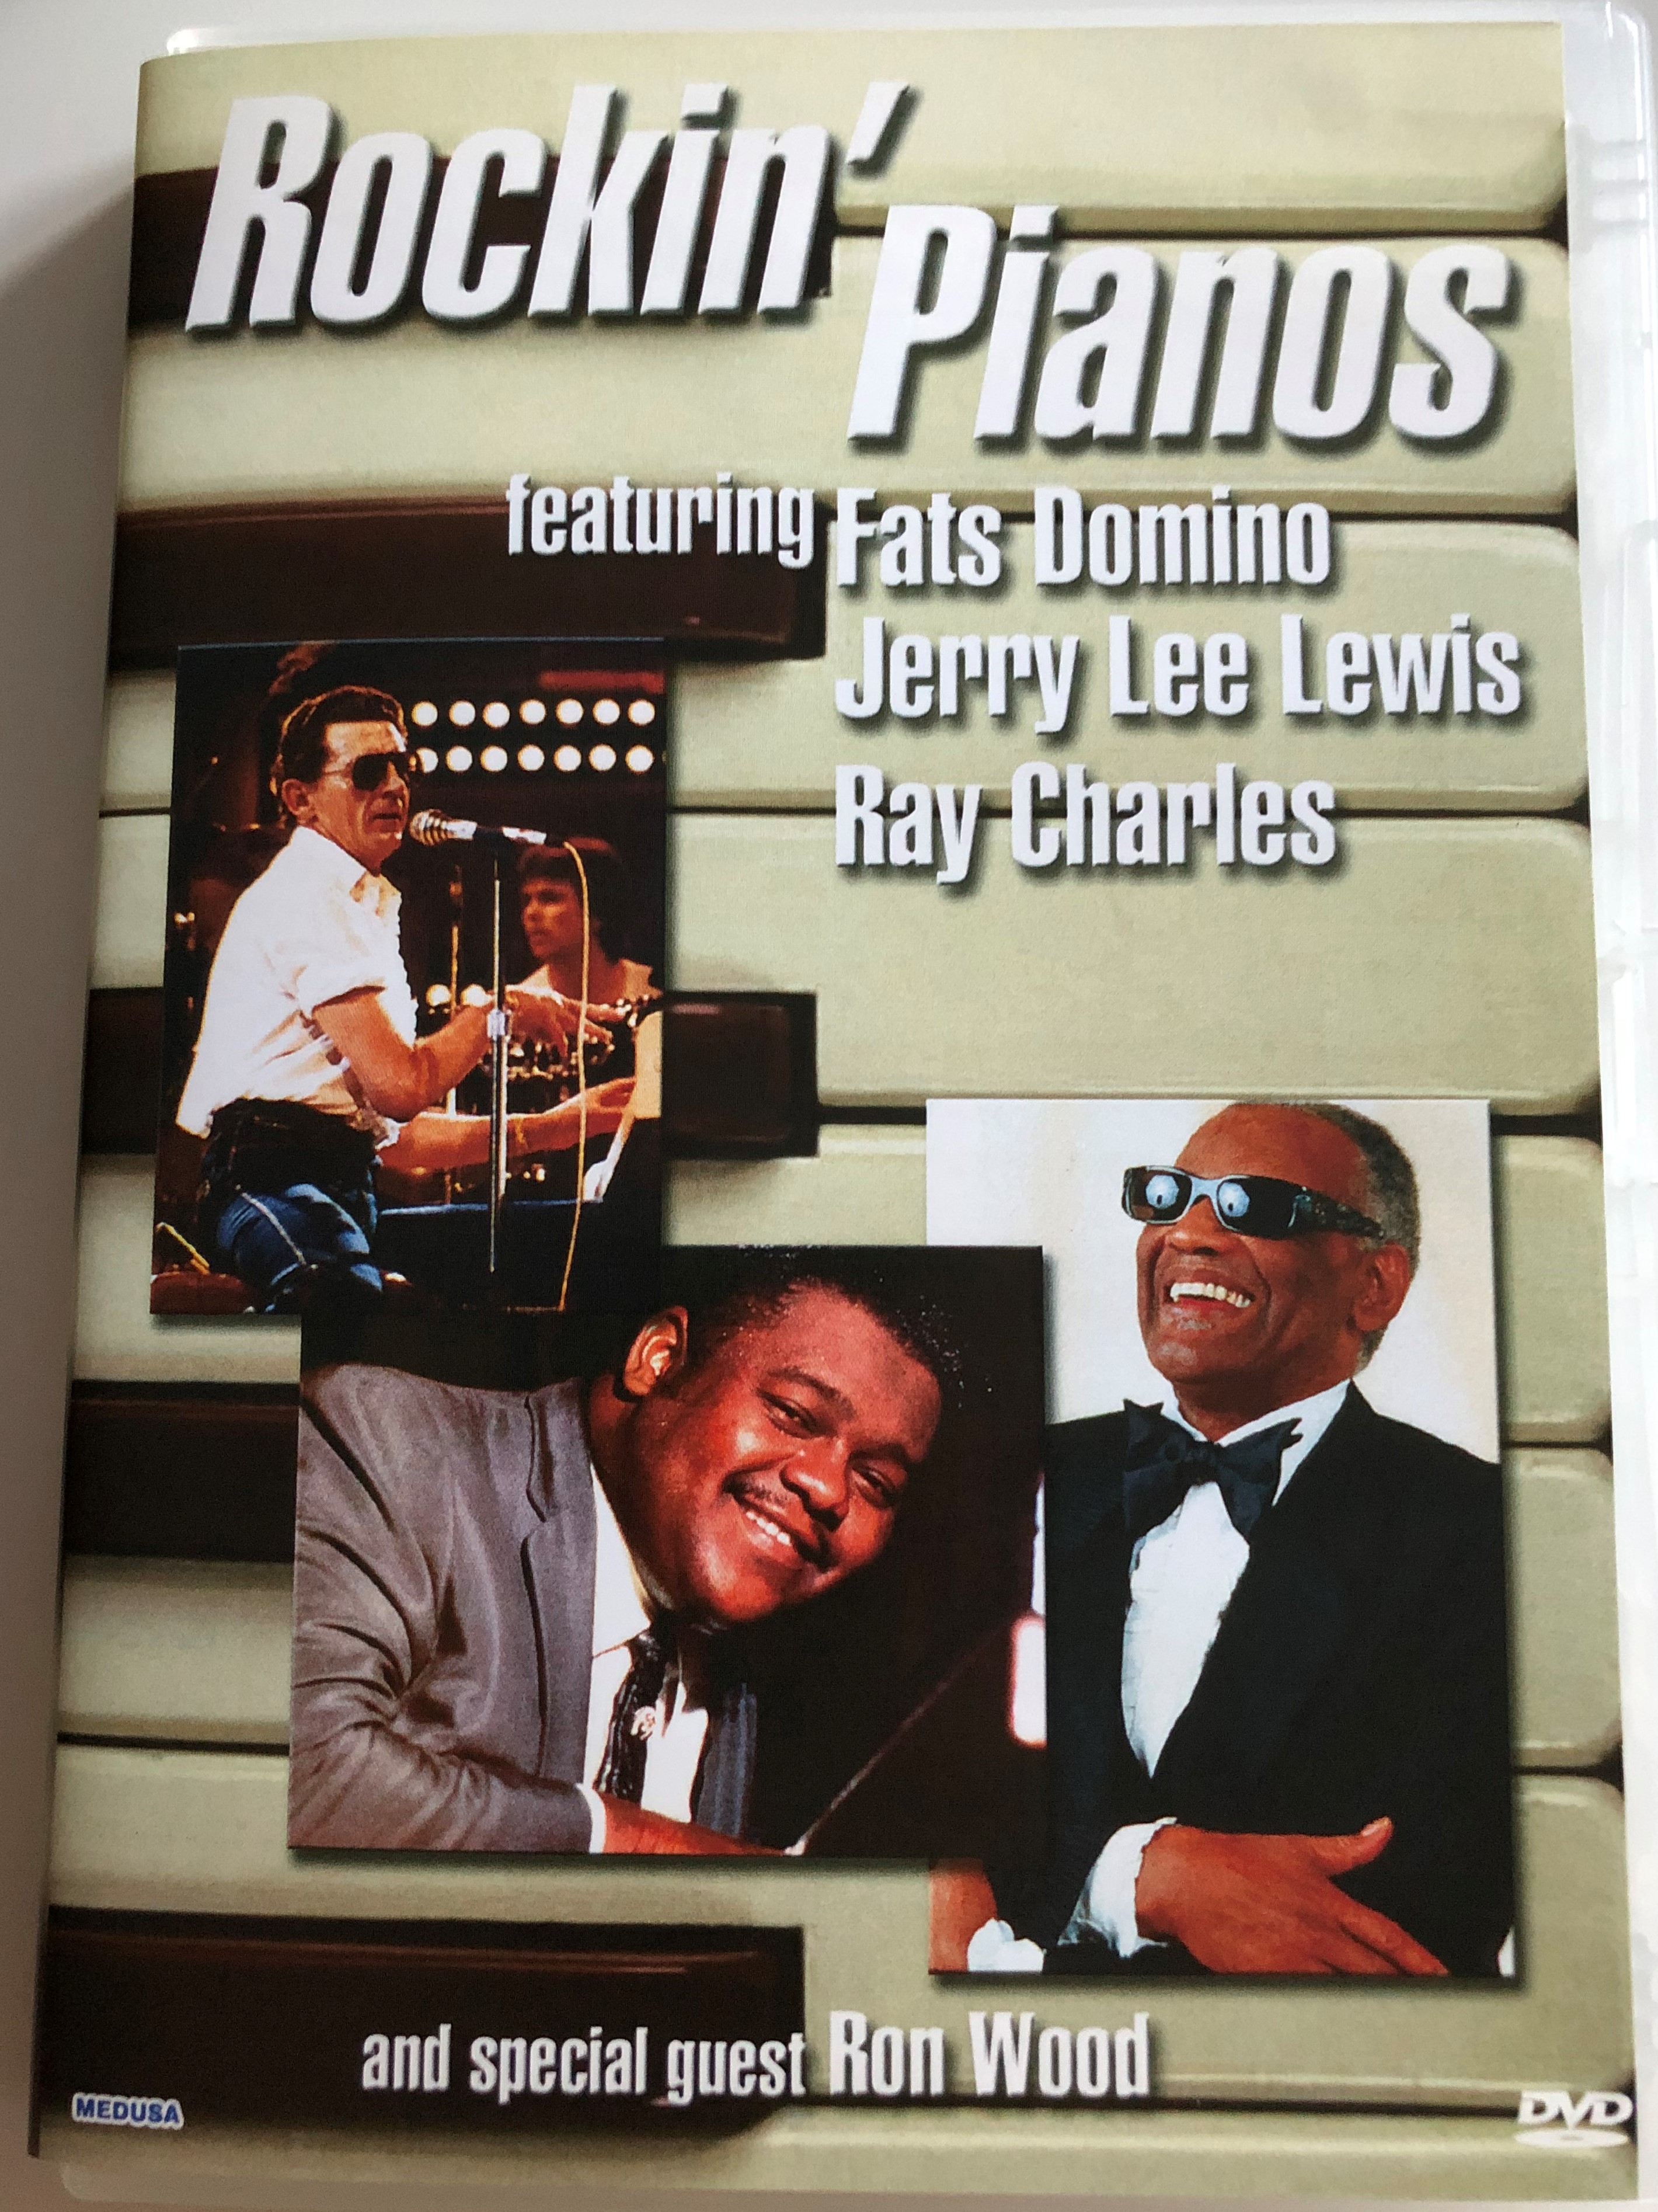 rockin-pianos-dvd2004-ft.-fats-domino-jerry-lee-lewis-ray-charles-and-special-guest-ron-wood-carinco-ag-1-.jpg